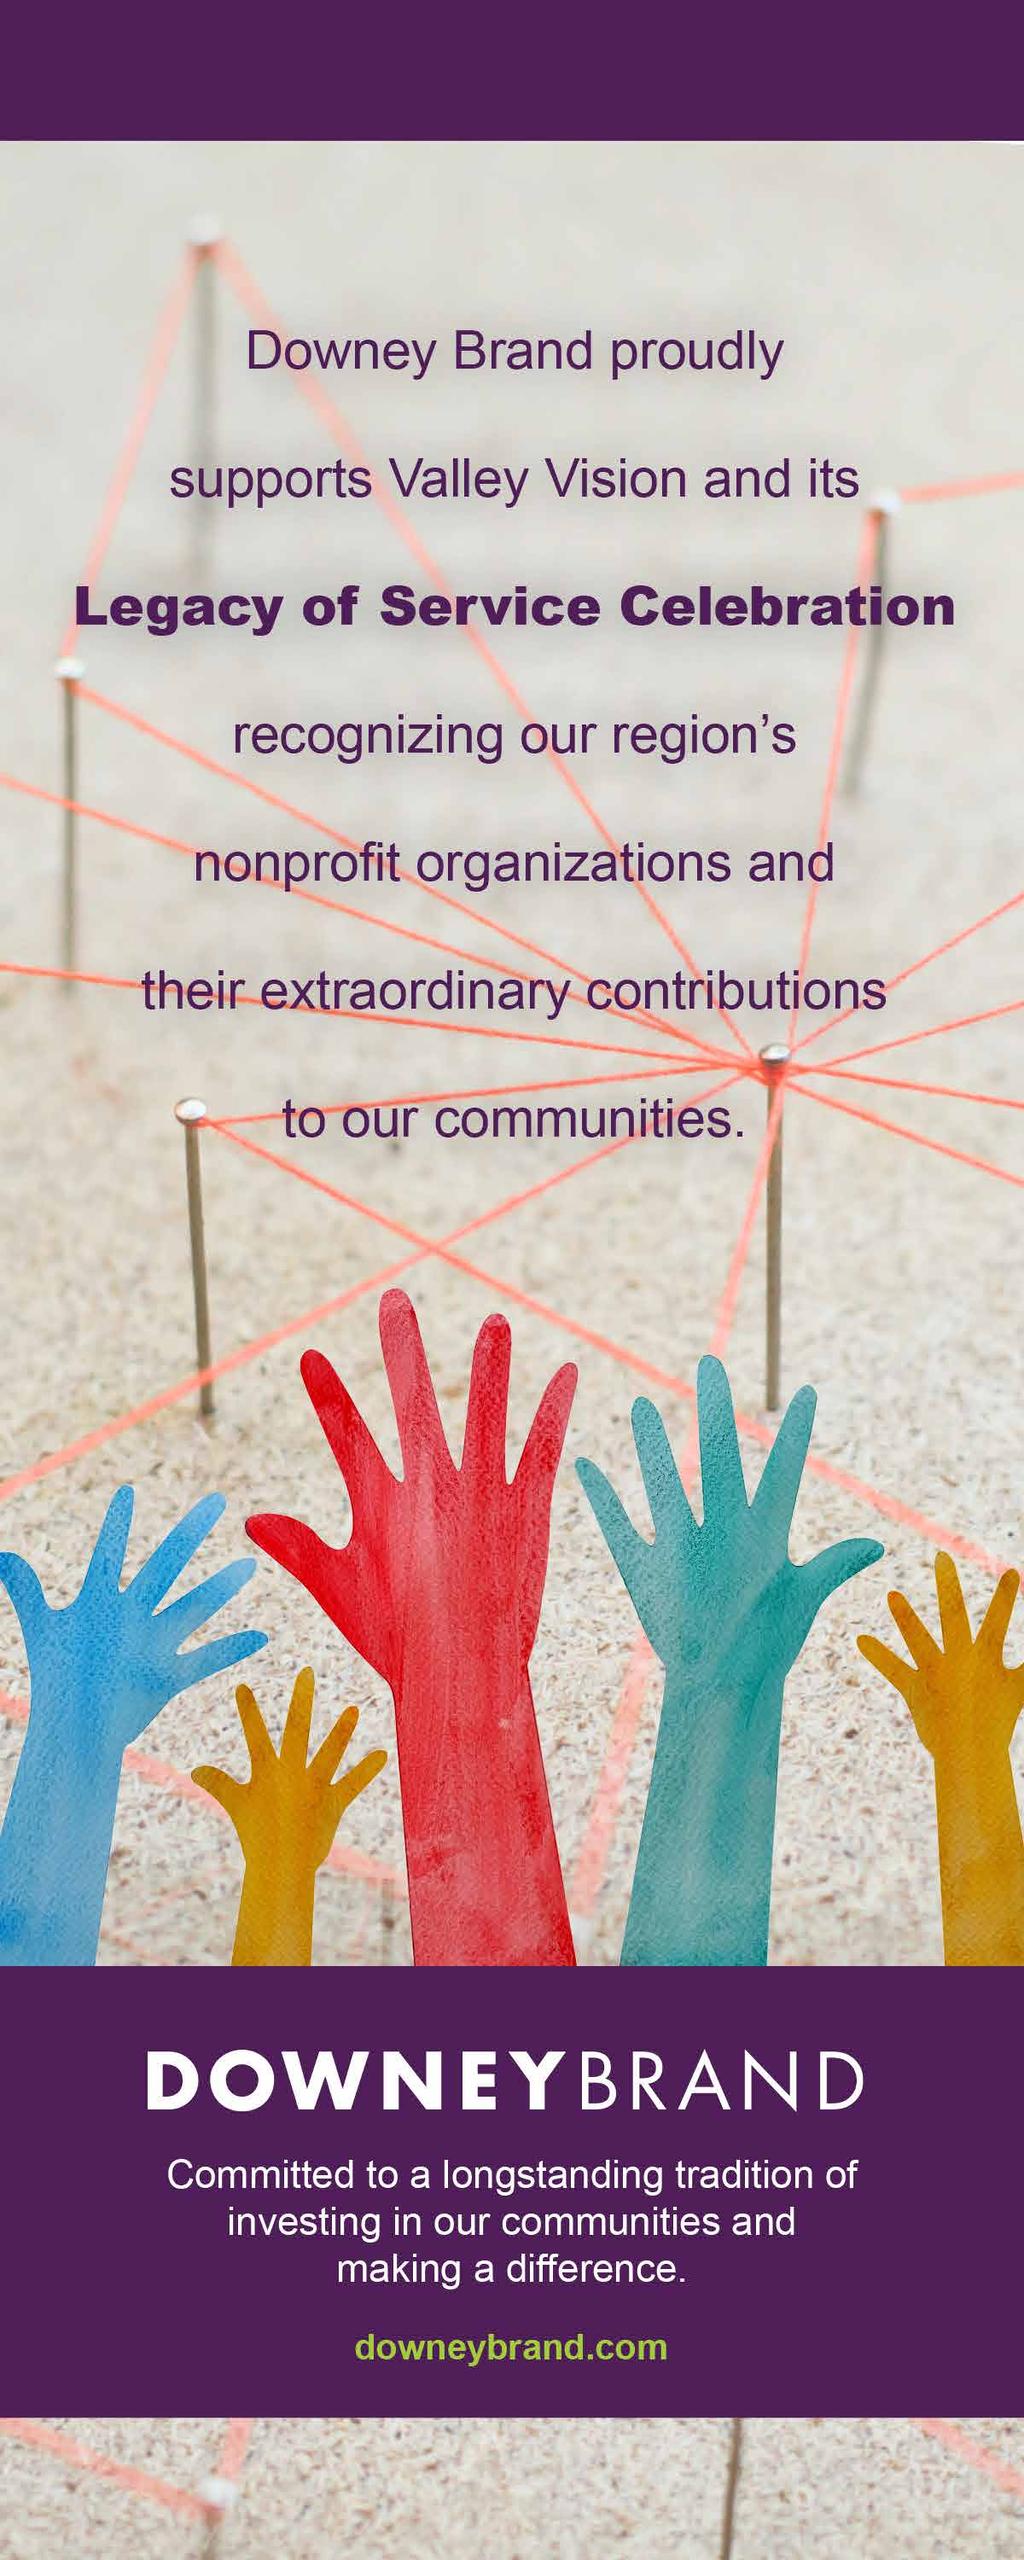 Celebrating the Impact Nonprofit Organizations Make The nonprofit sector enriches our communities in ways impossible to completely measure.